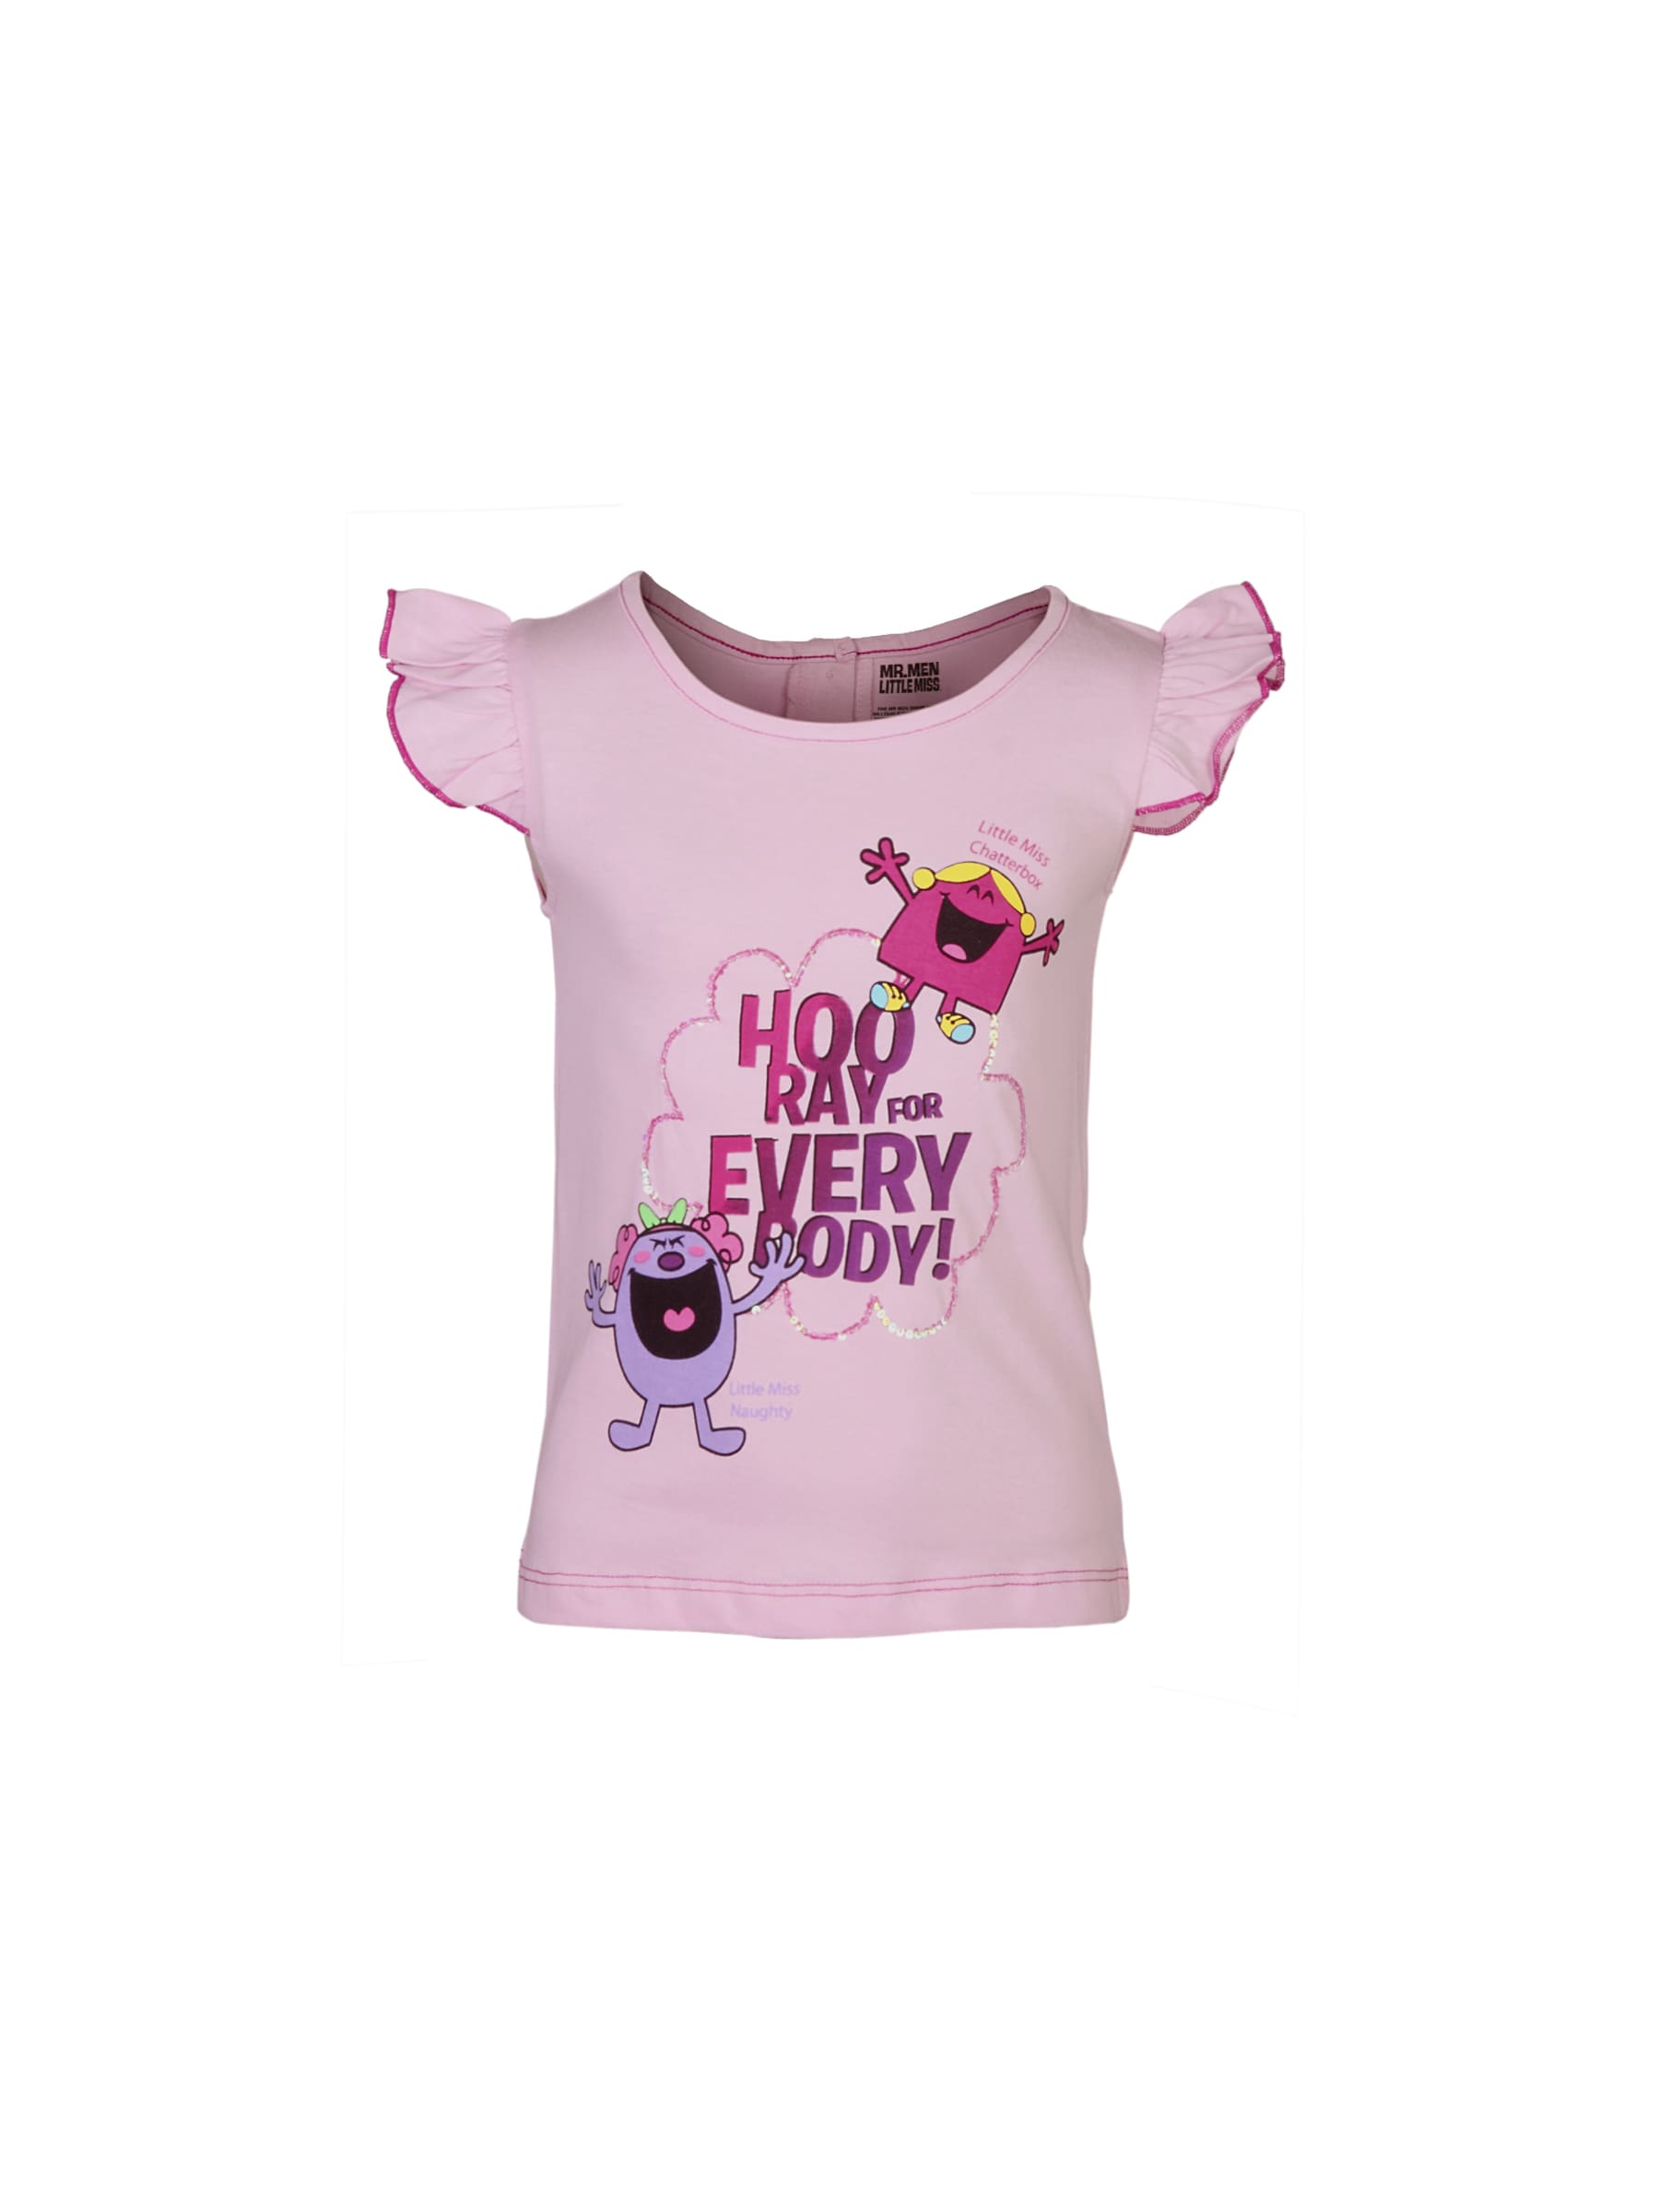 Little Miss Girls Chatterbox Pink Top